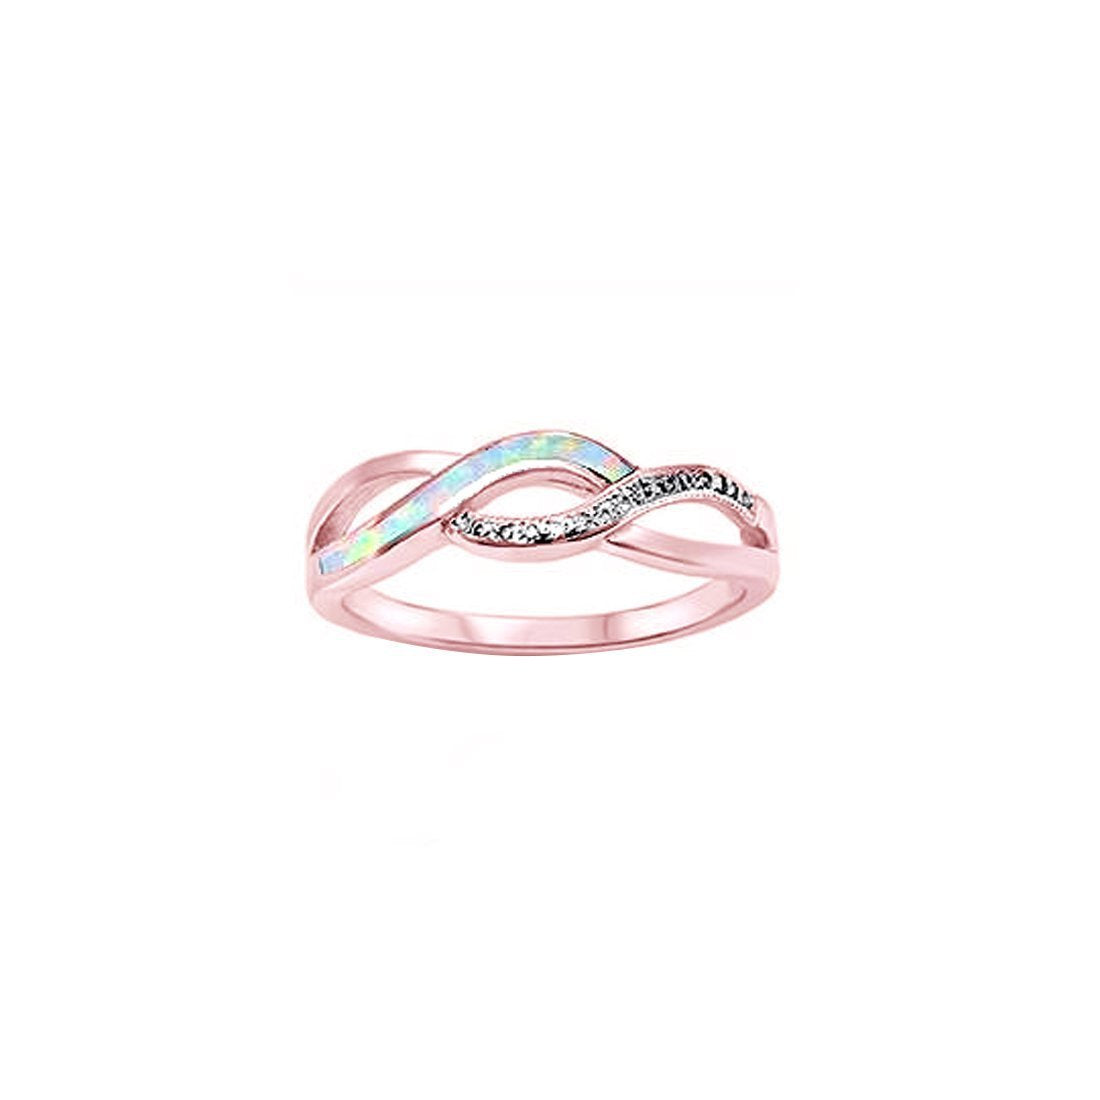 Crisscross Infinity Ring Created Opal Round Cubic Zirconia 925 Sterling Silver Choose Color